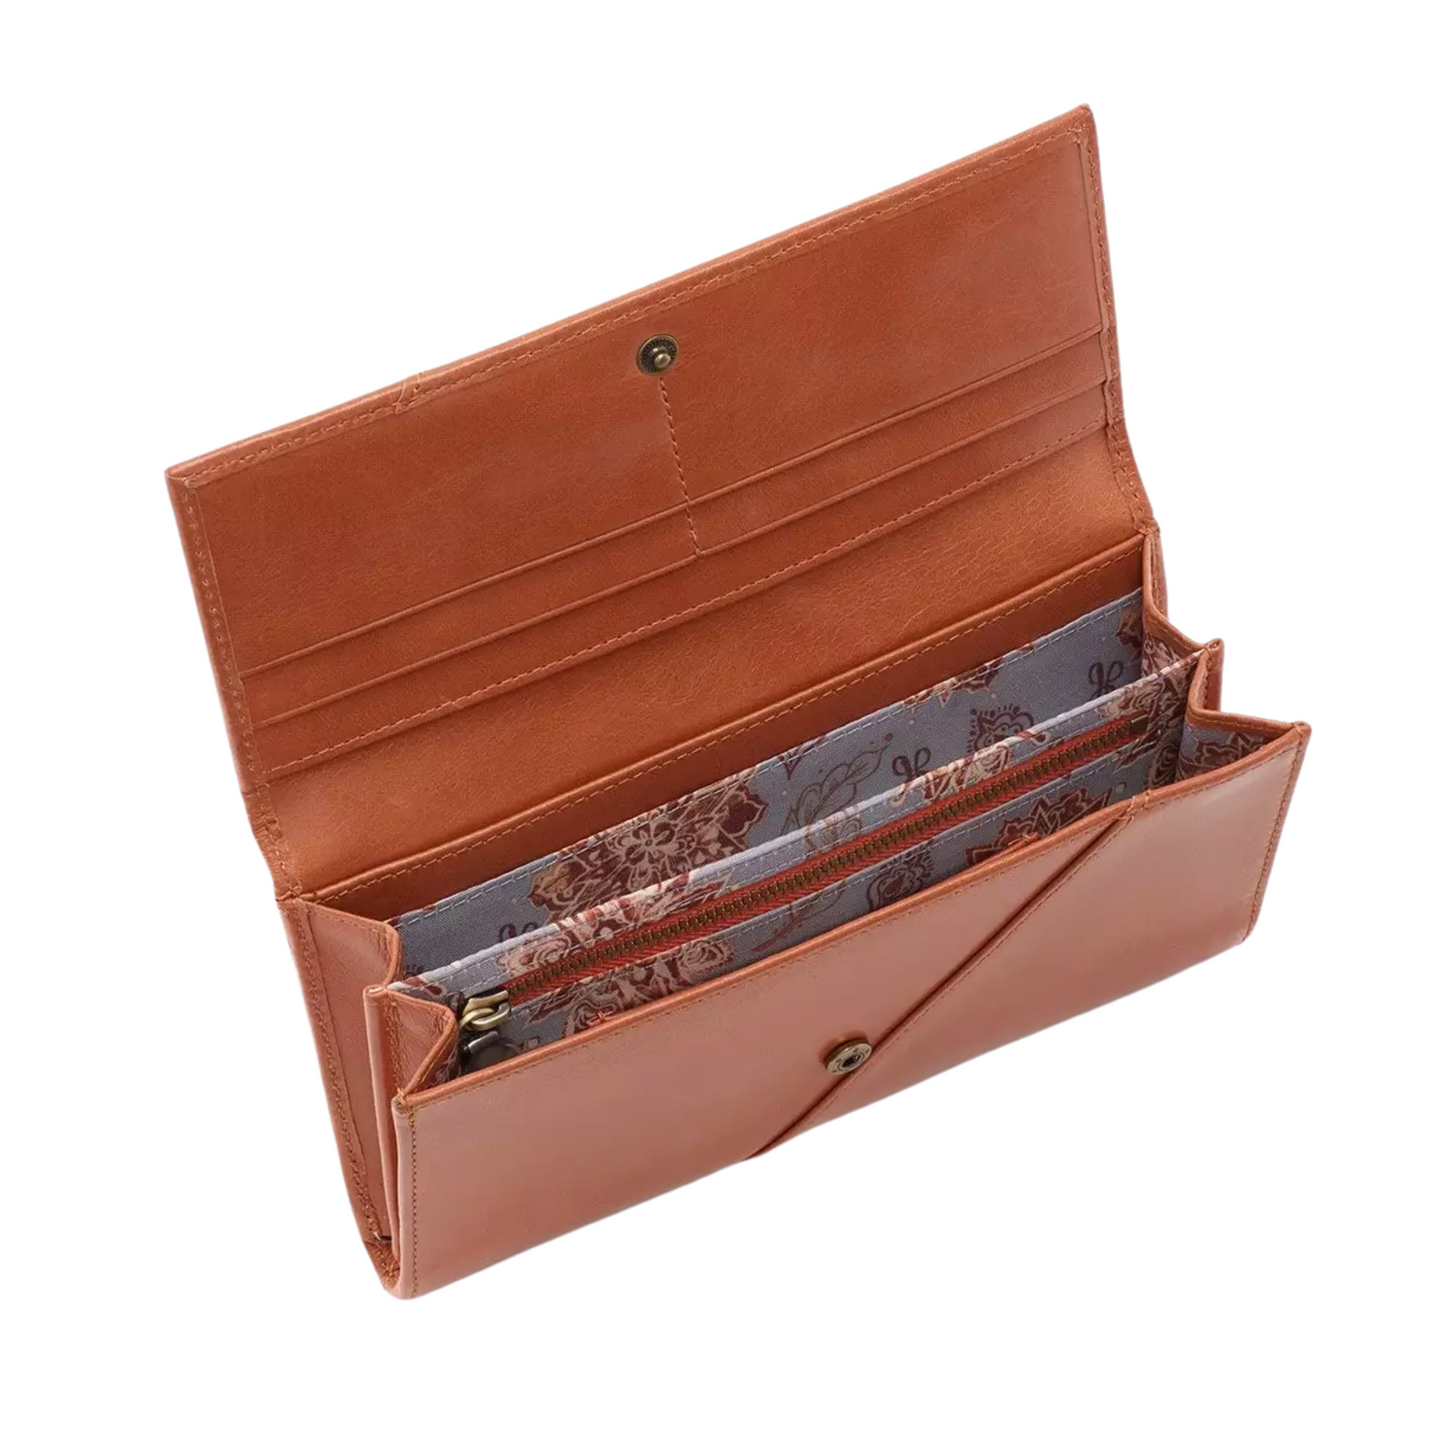 The interior of a honey brown accordion wallet with floral lined interior is pictured at an angle.